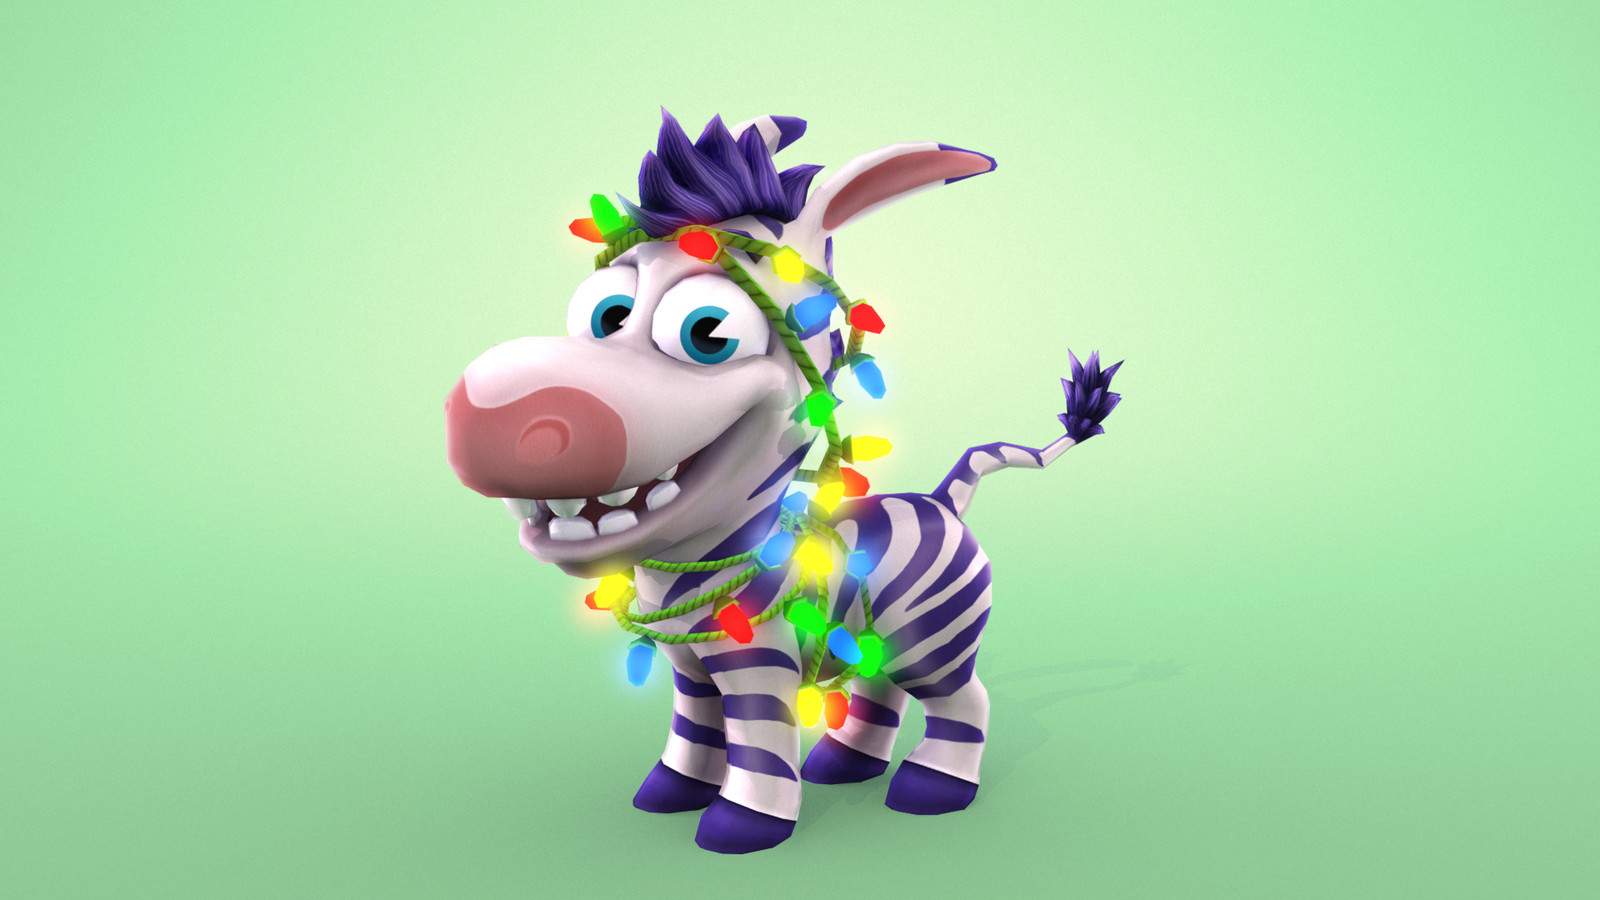 Purchasable Character Wearable. Festive lights.